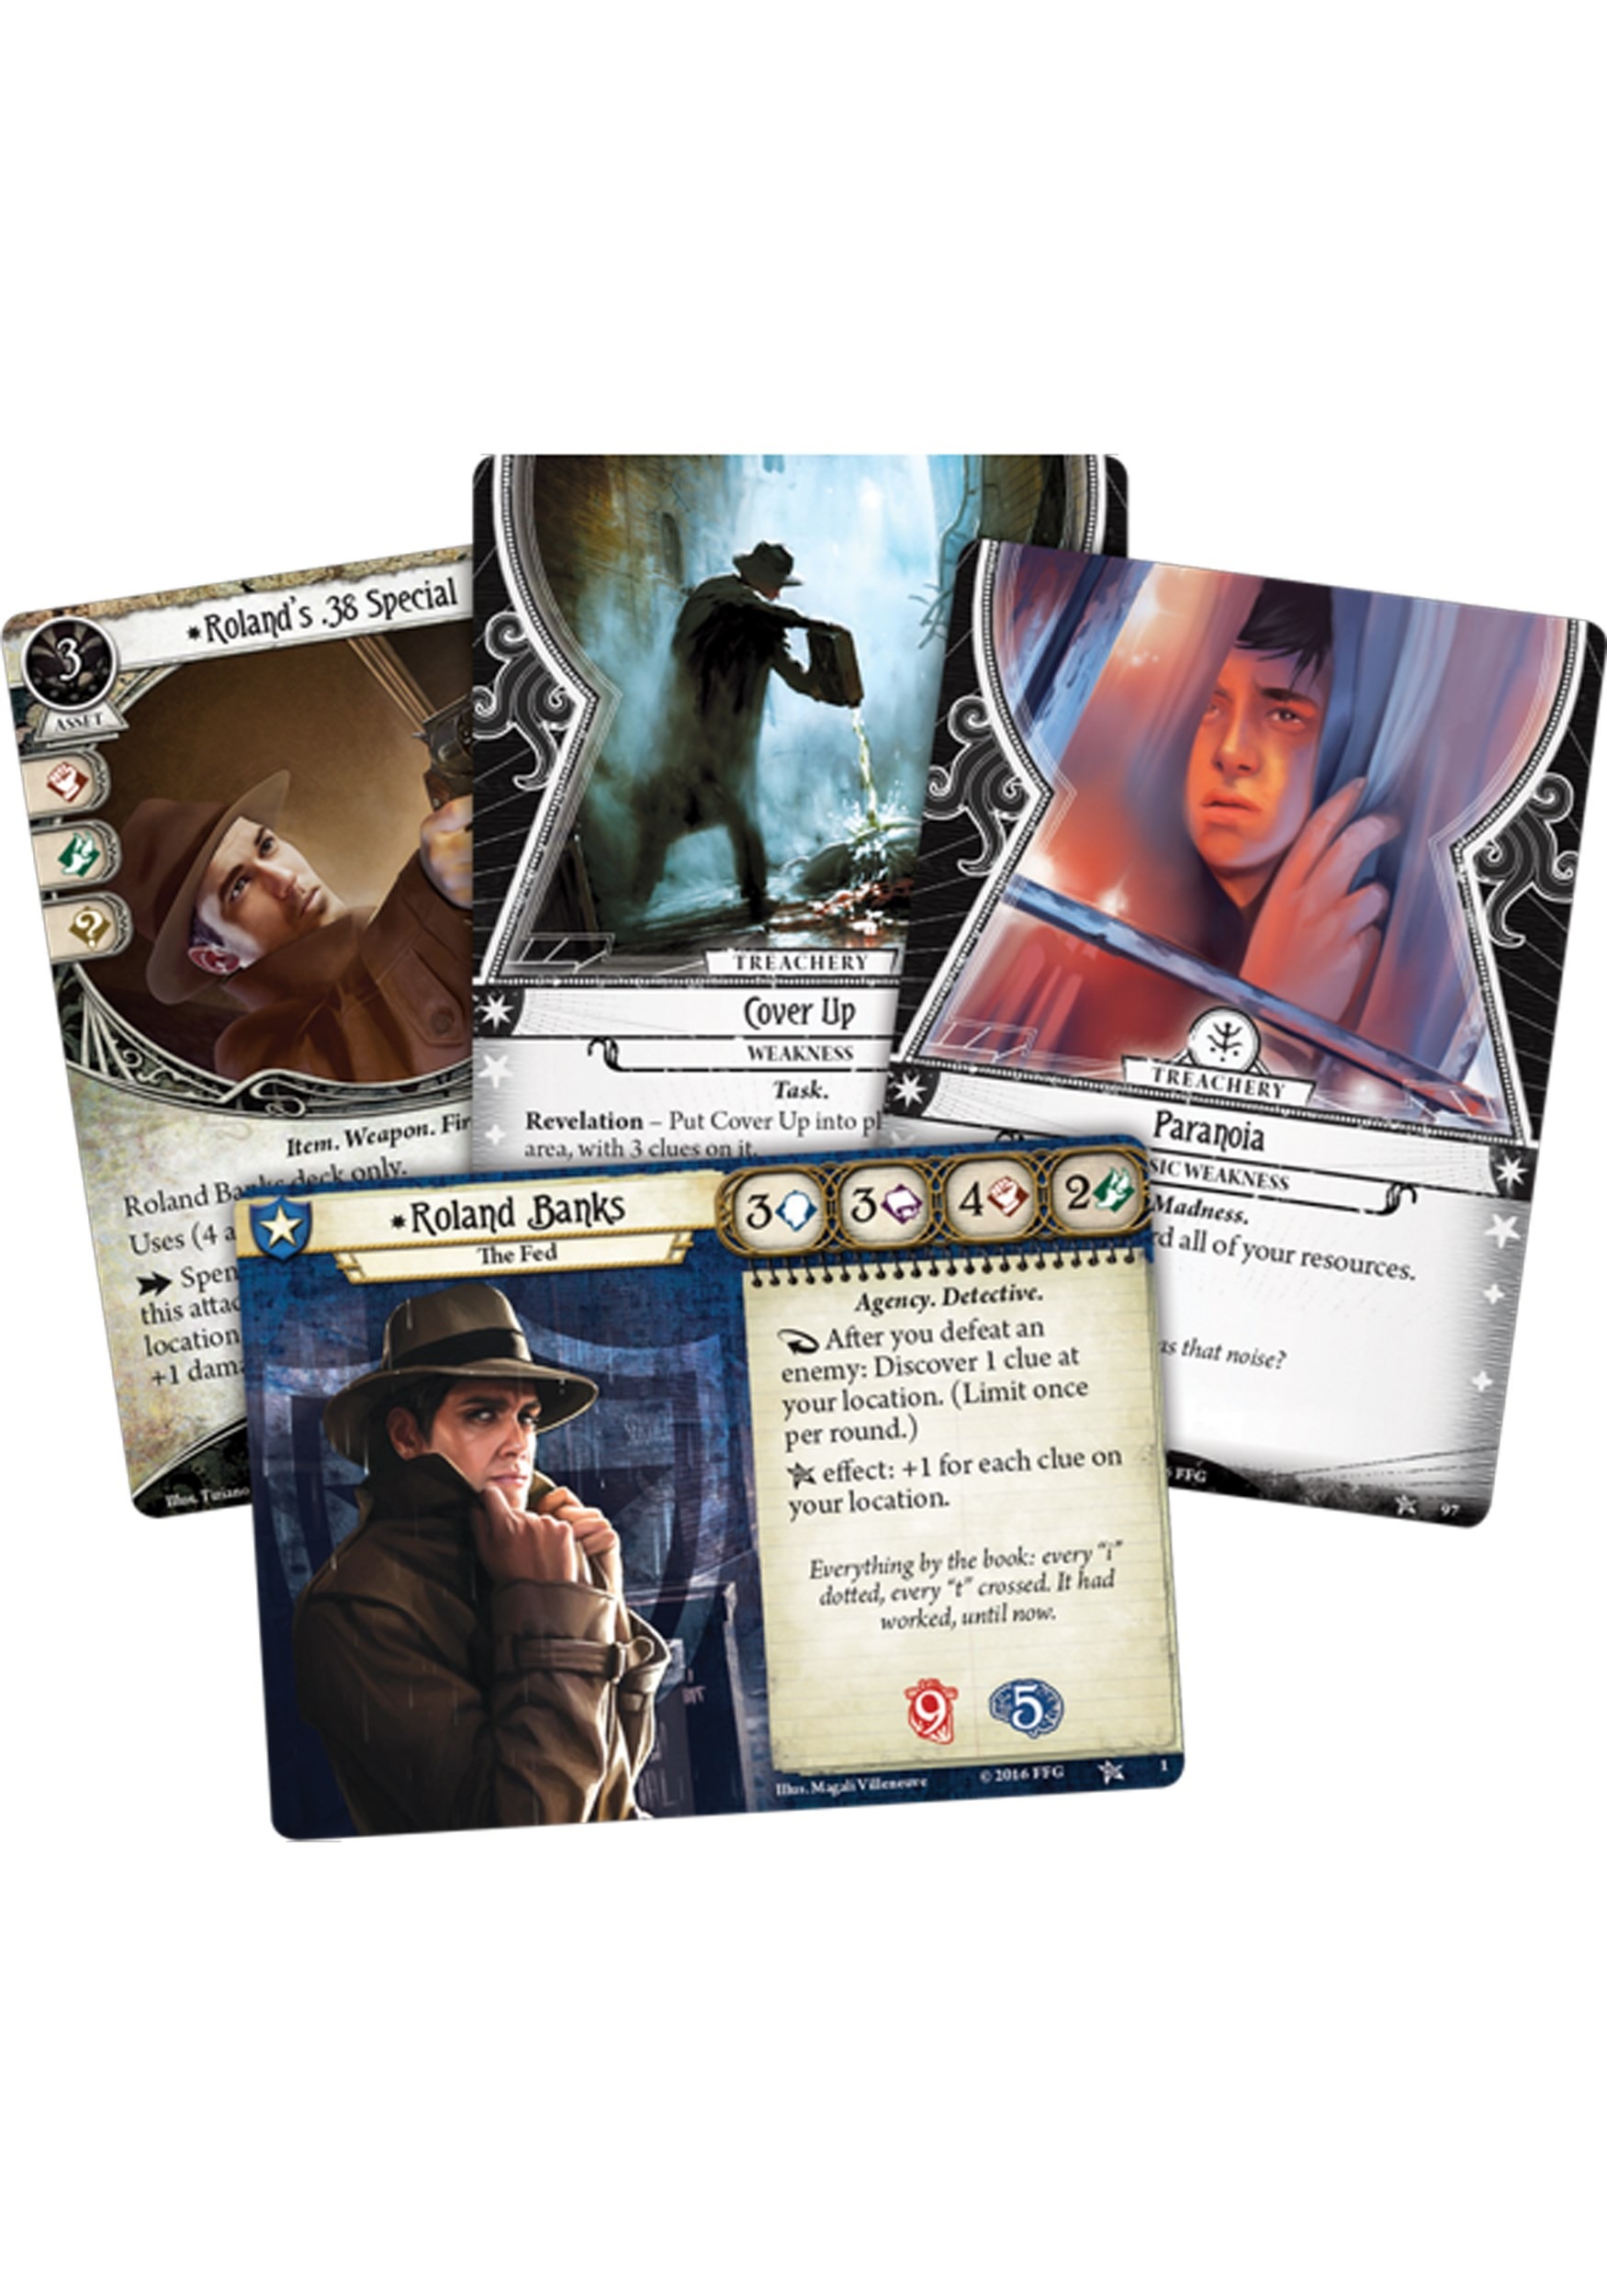 Arkham Horror: The Card Game , Strategy Card Games